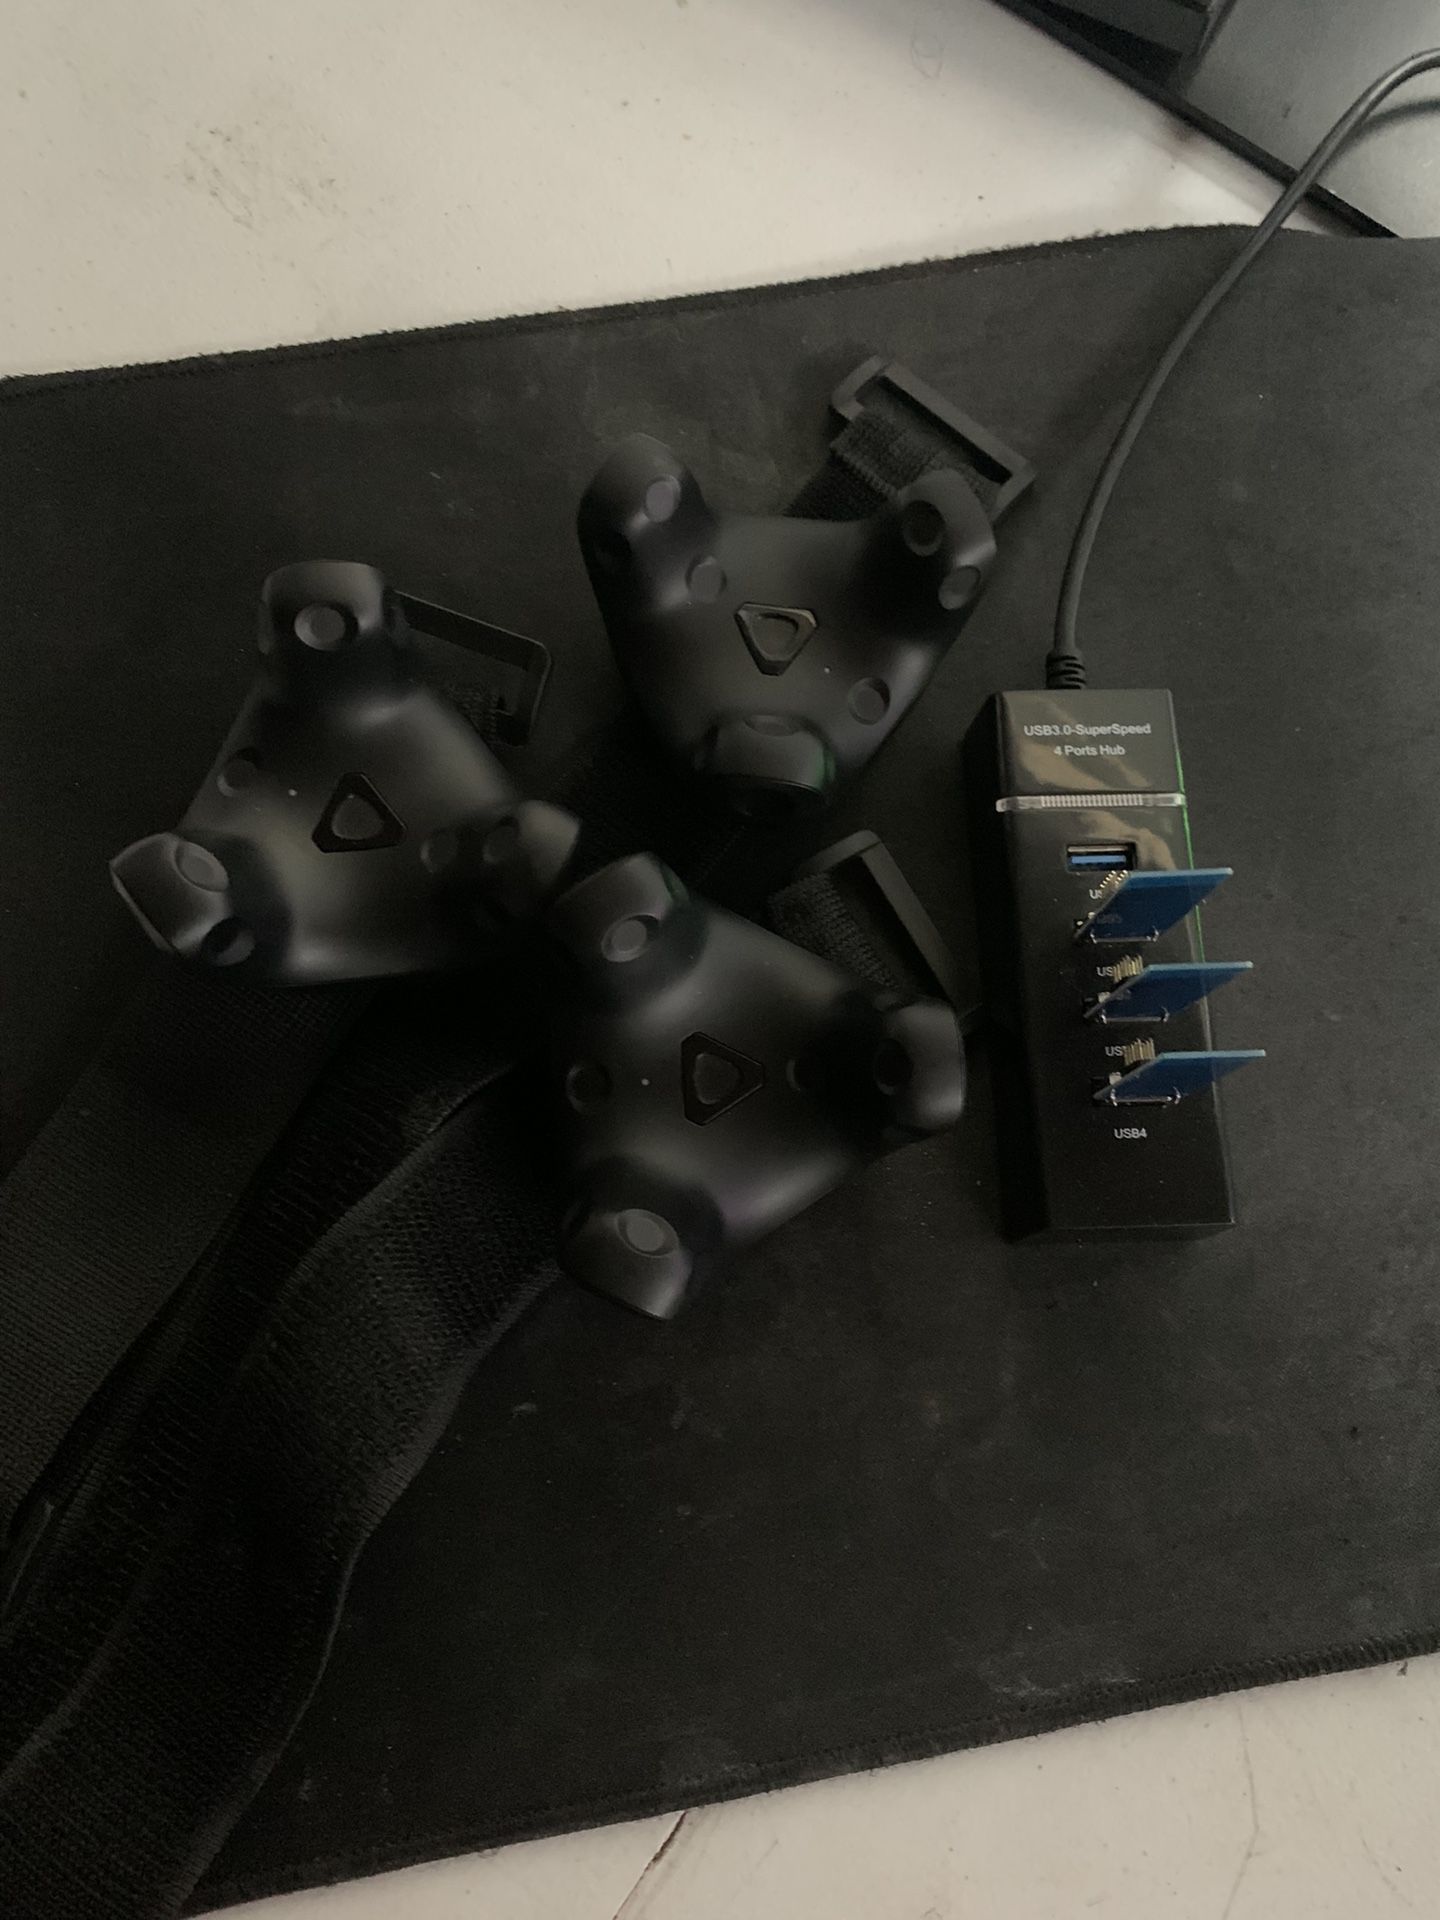 Complete Vr Setup With 3x 2.0 Vive Trackers Price negotiable